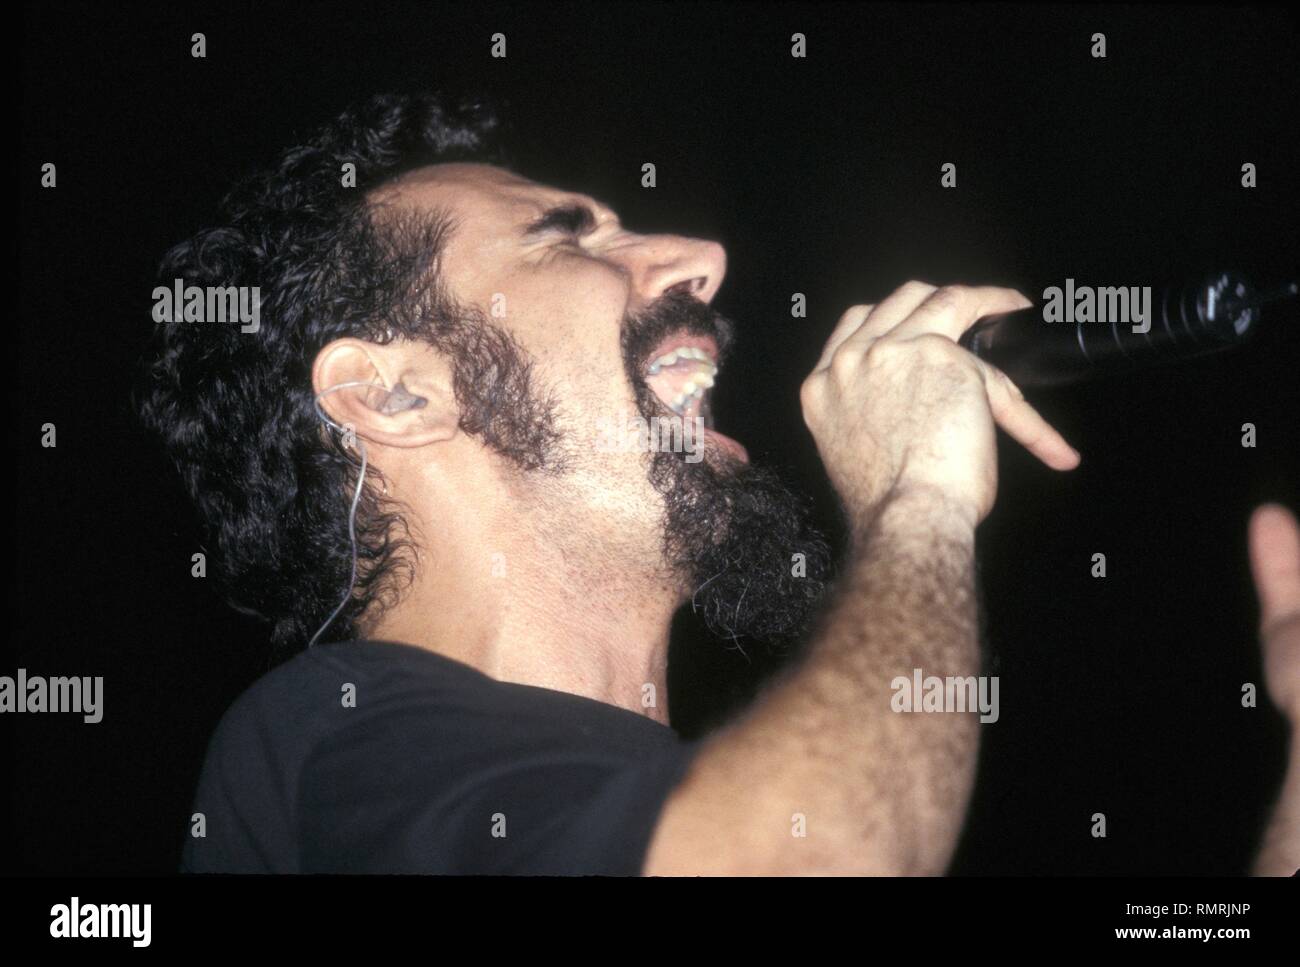 Singer Serj Tankian of the hard rock band System of a Down is shown performing on stage during 'live' concert appearance. Stock Photo